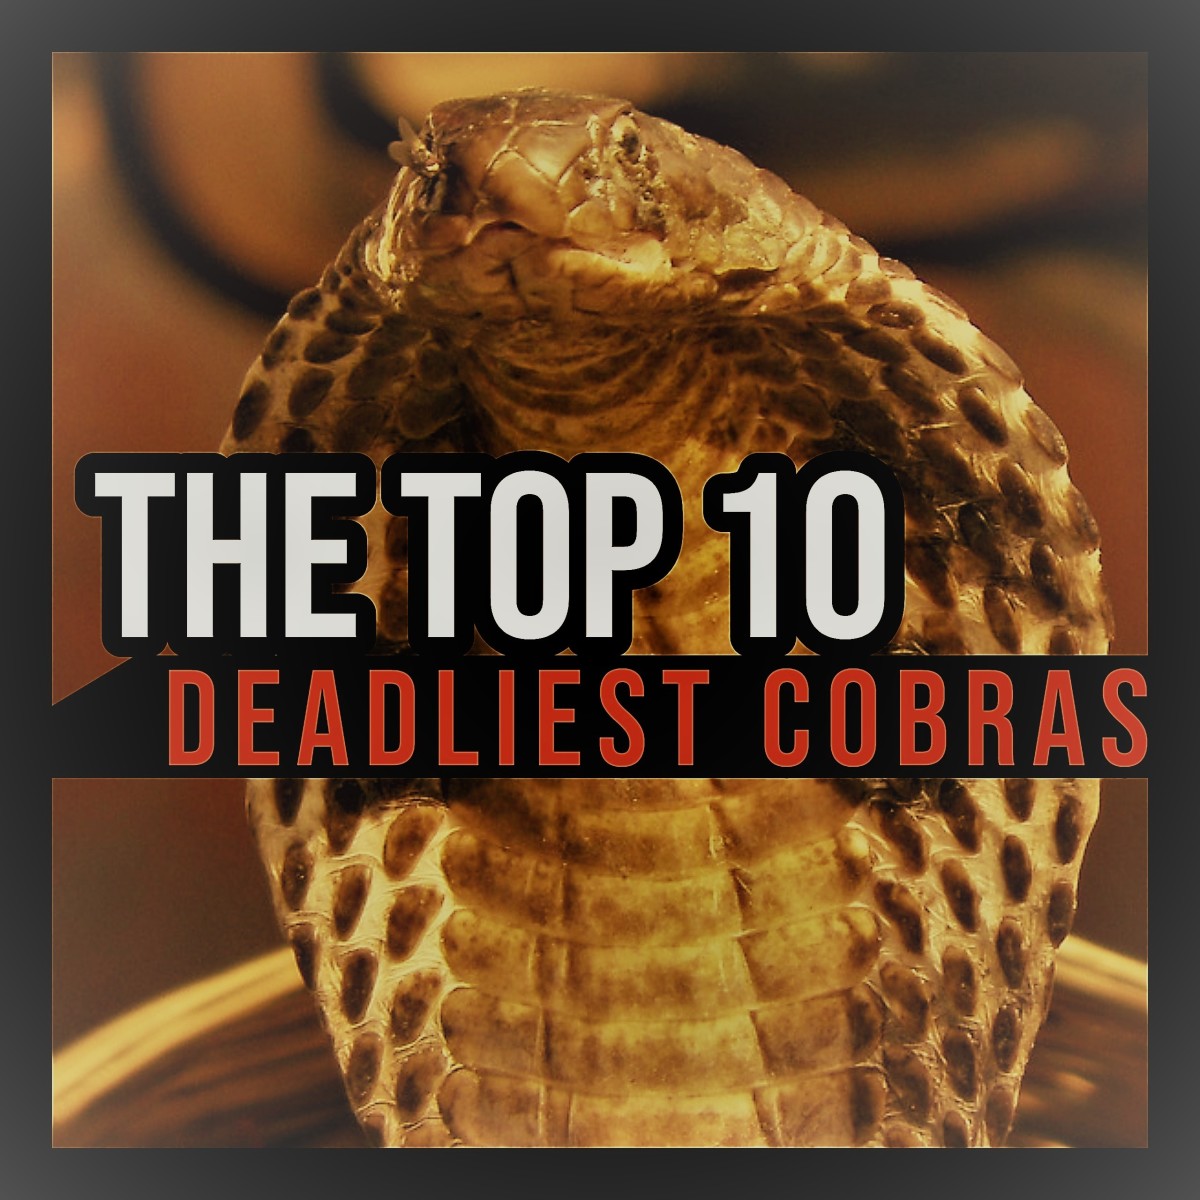 The Top 10 Deadliest Cobras in the World